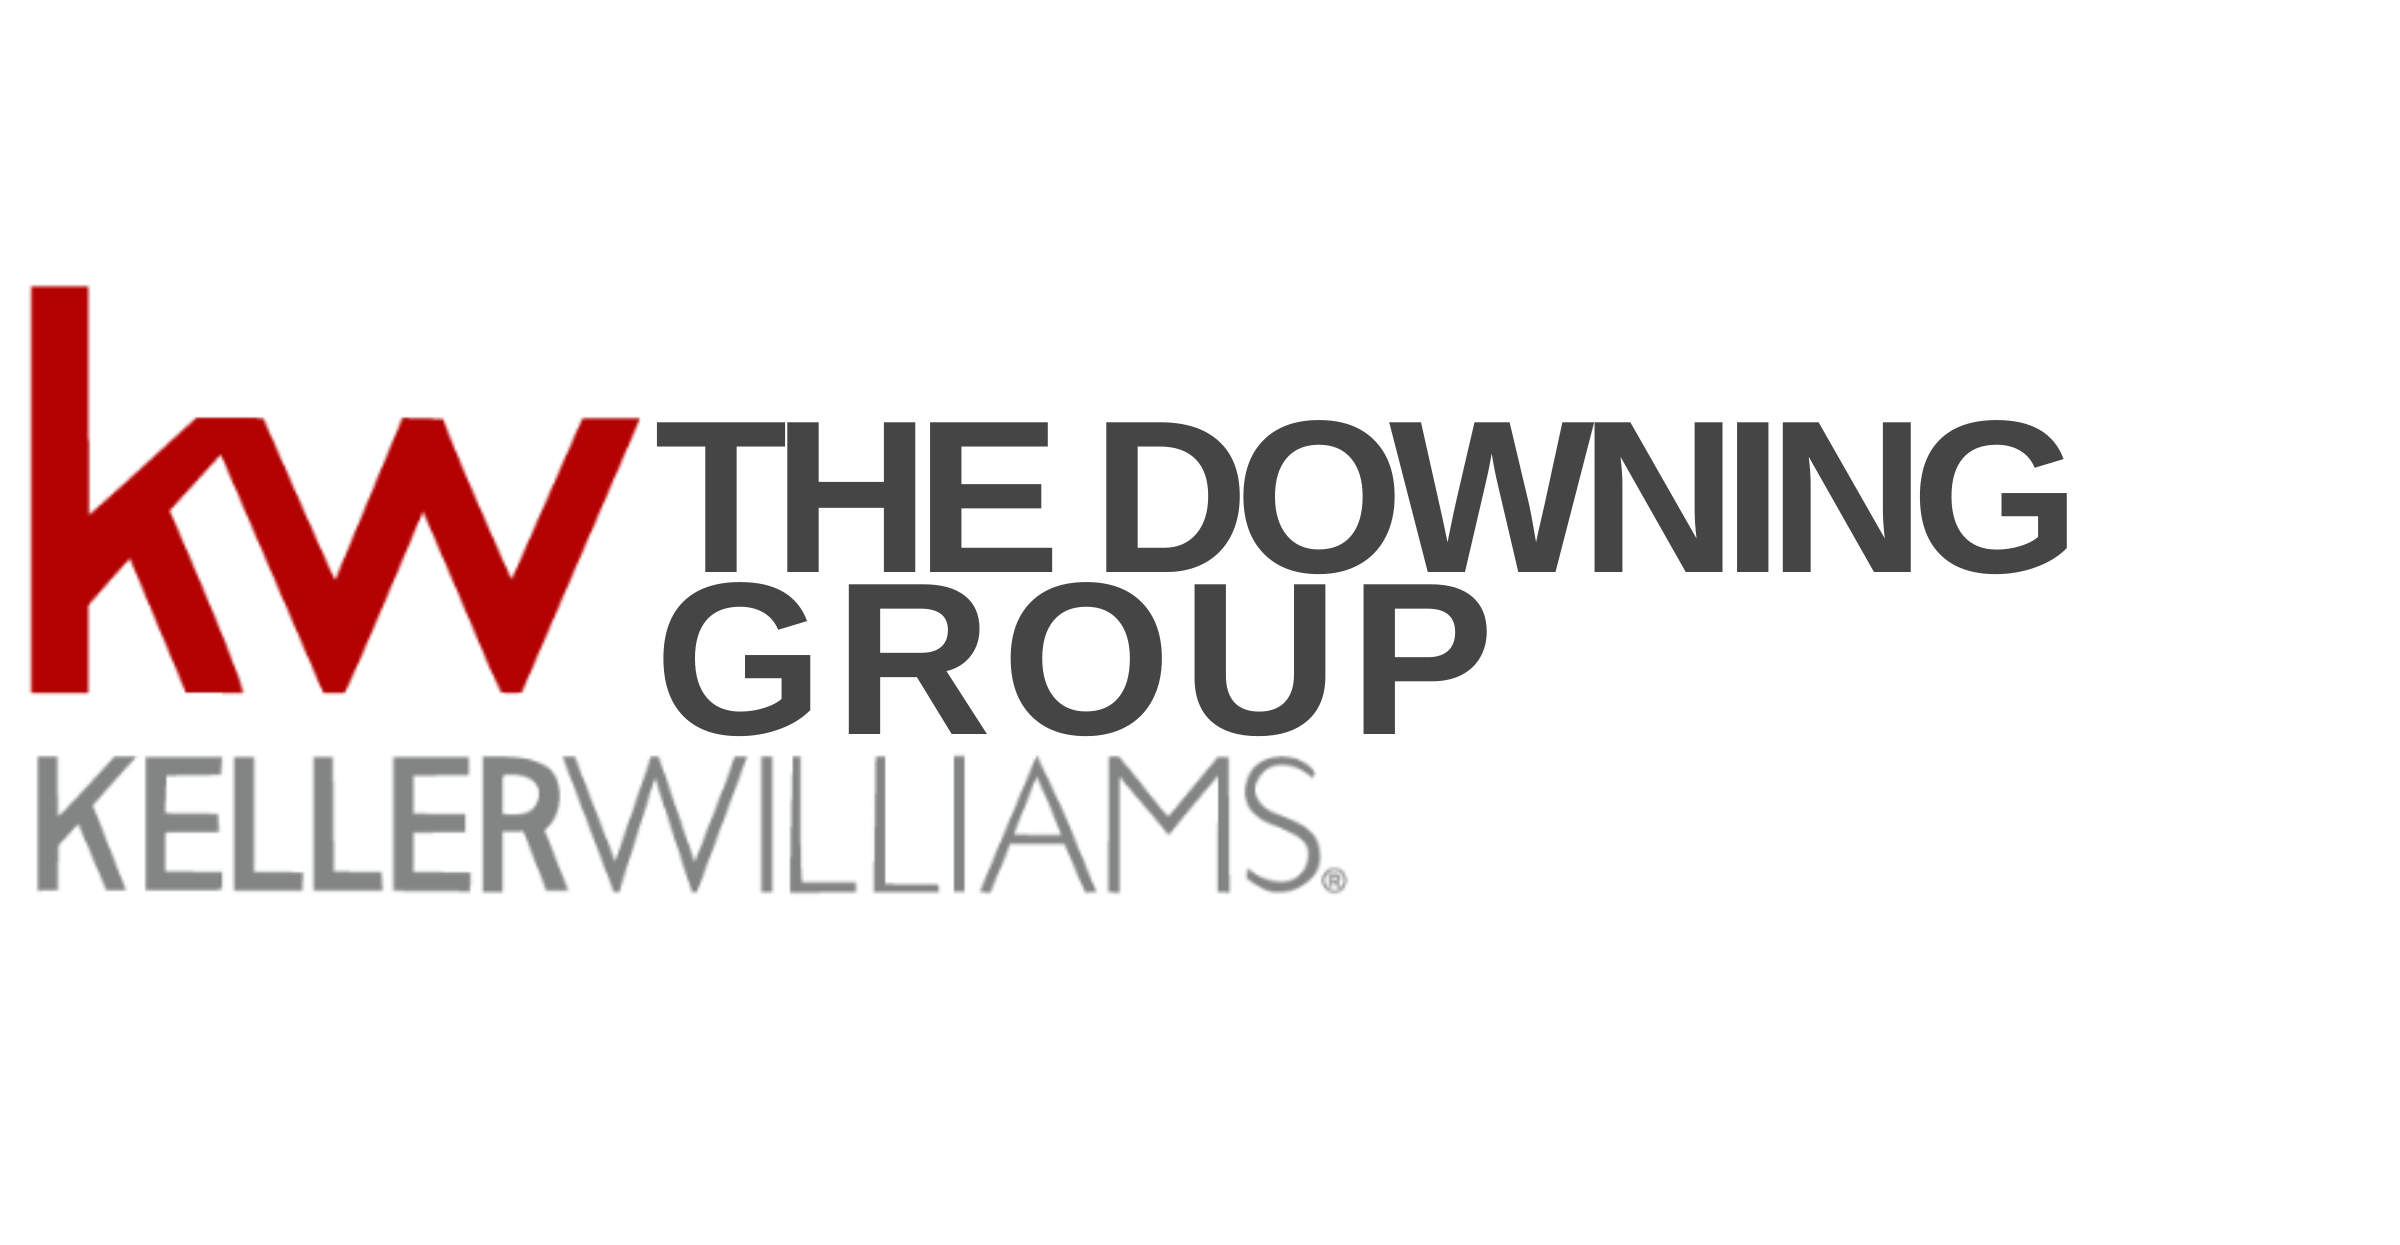 The Downing Group Keller Williams